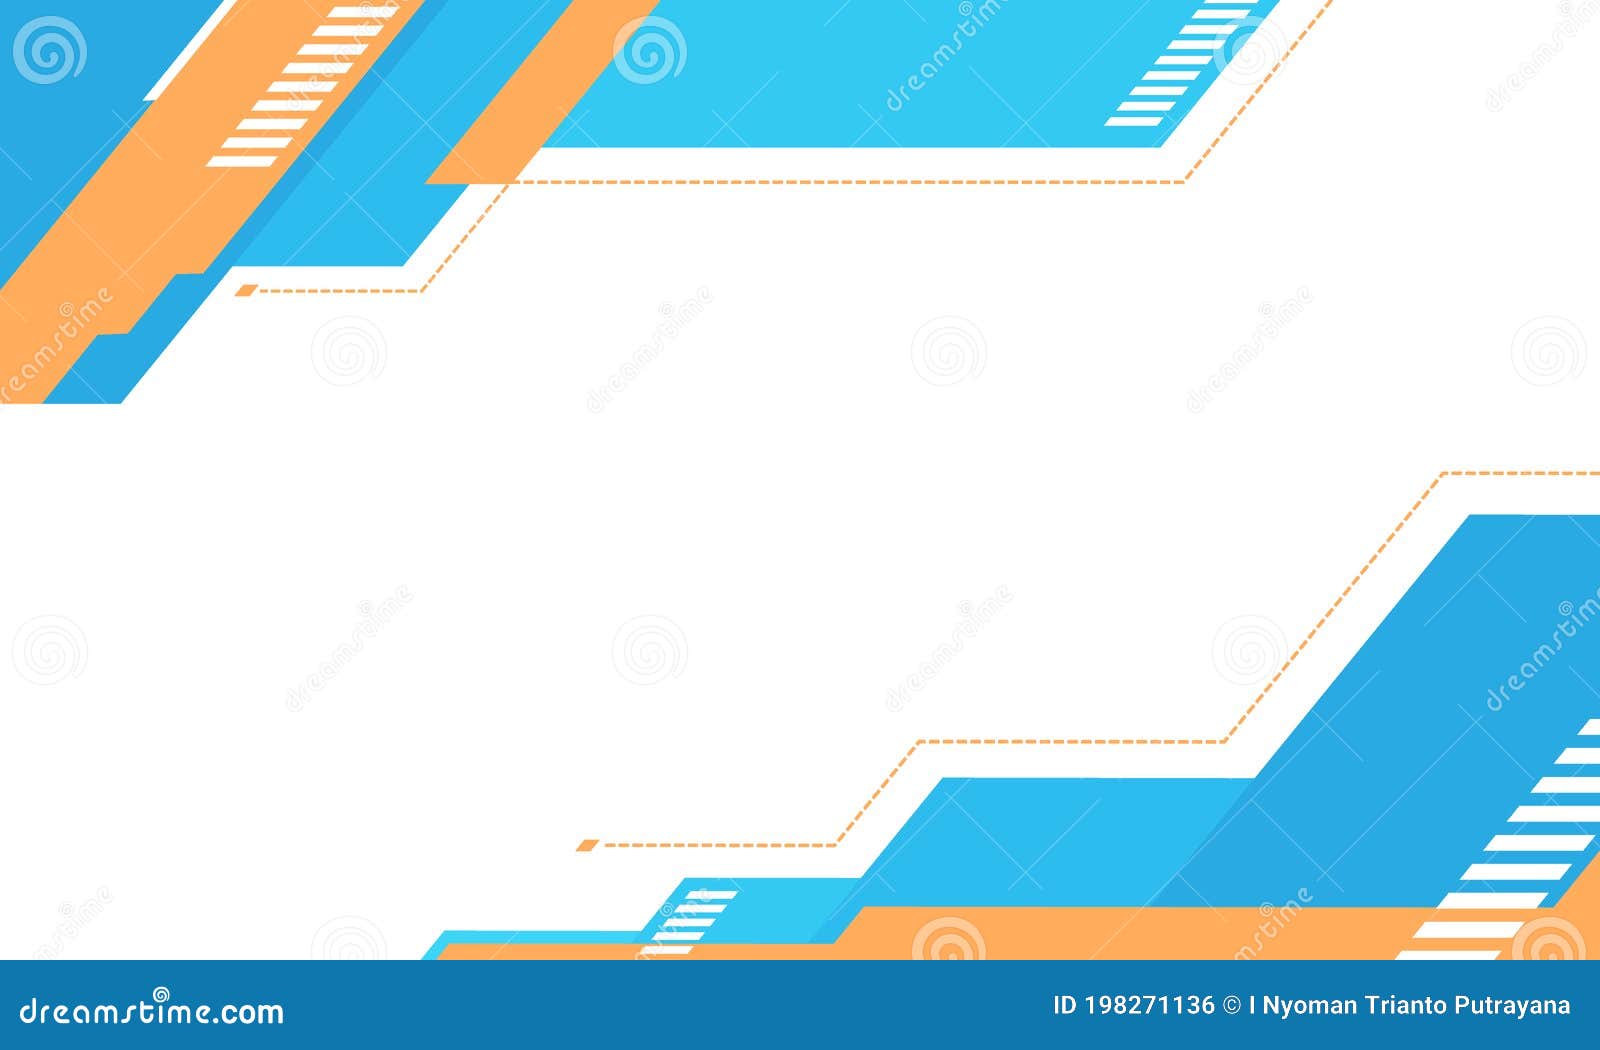 white and blue background design